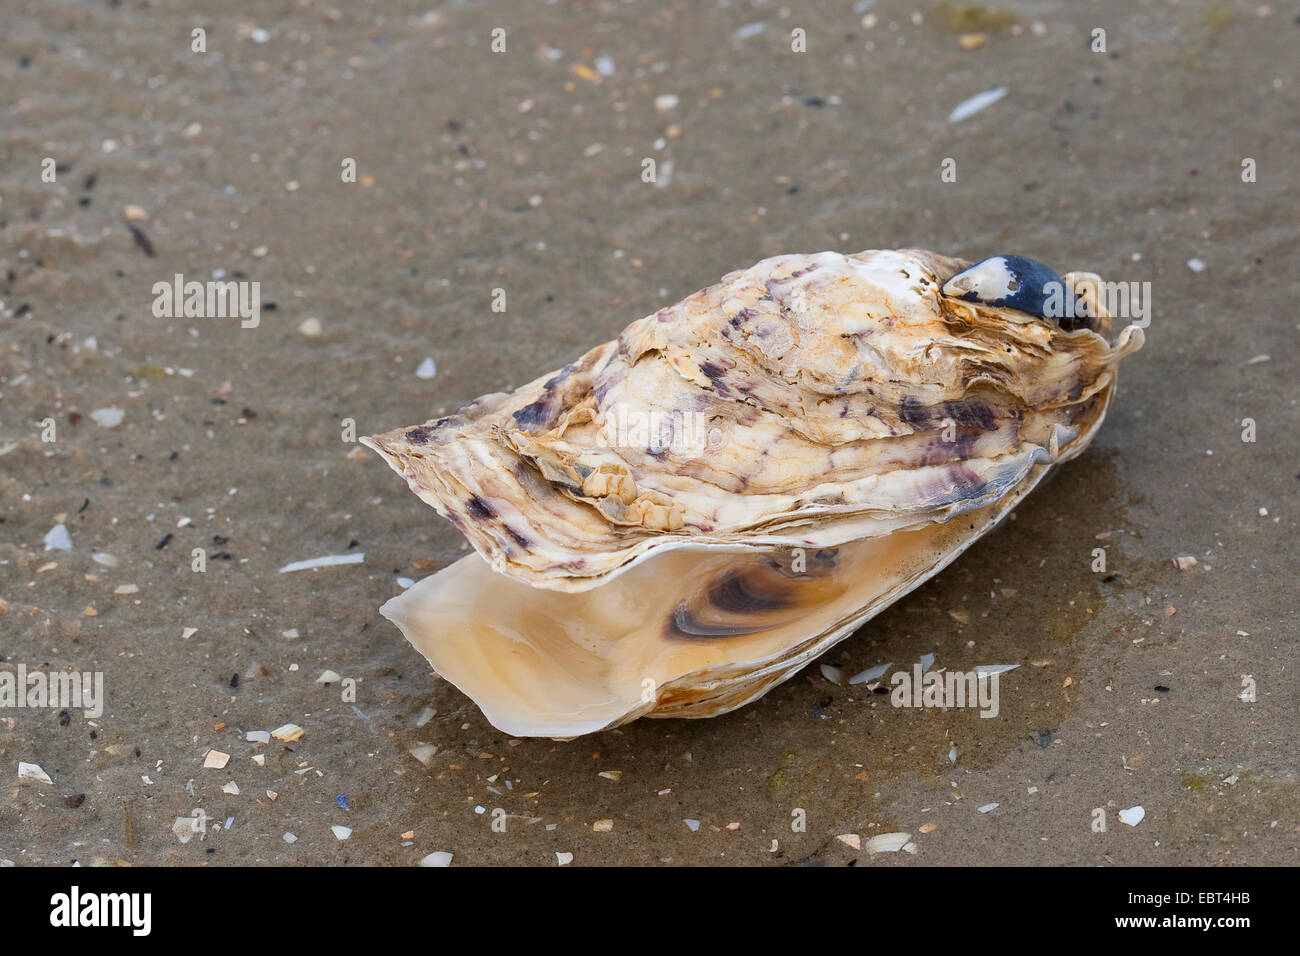 Pacific oyster, giant Pacific oyster, Japanese oyster (Crassostrea gigas), shell on the beach, Germany Stock Photo